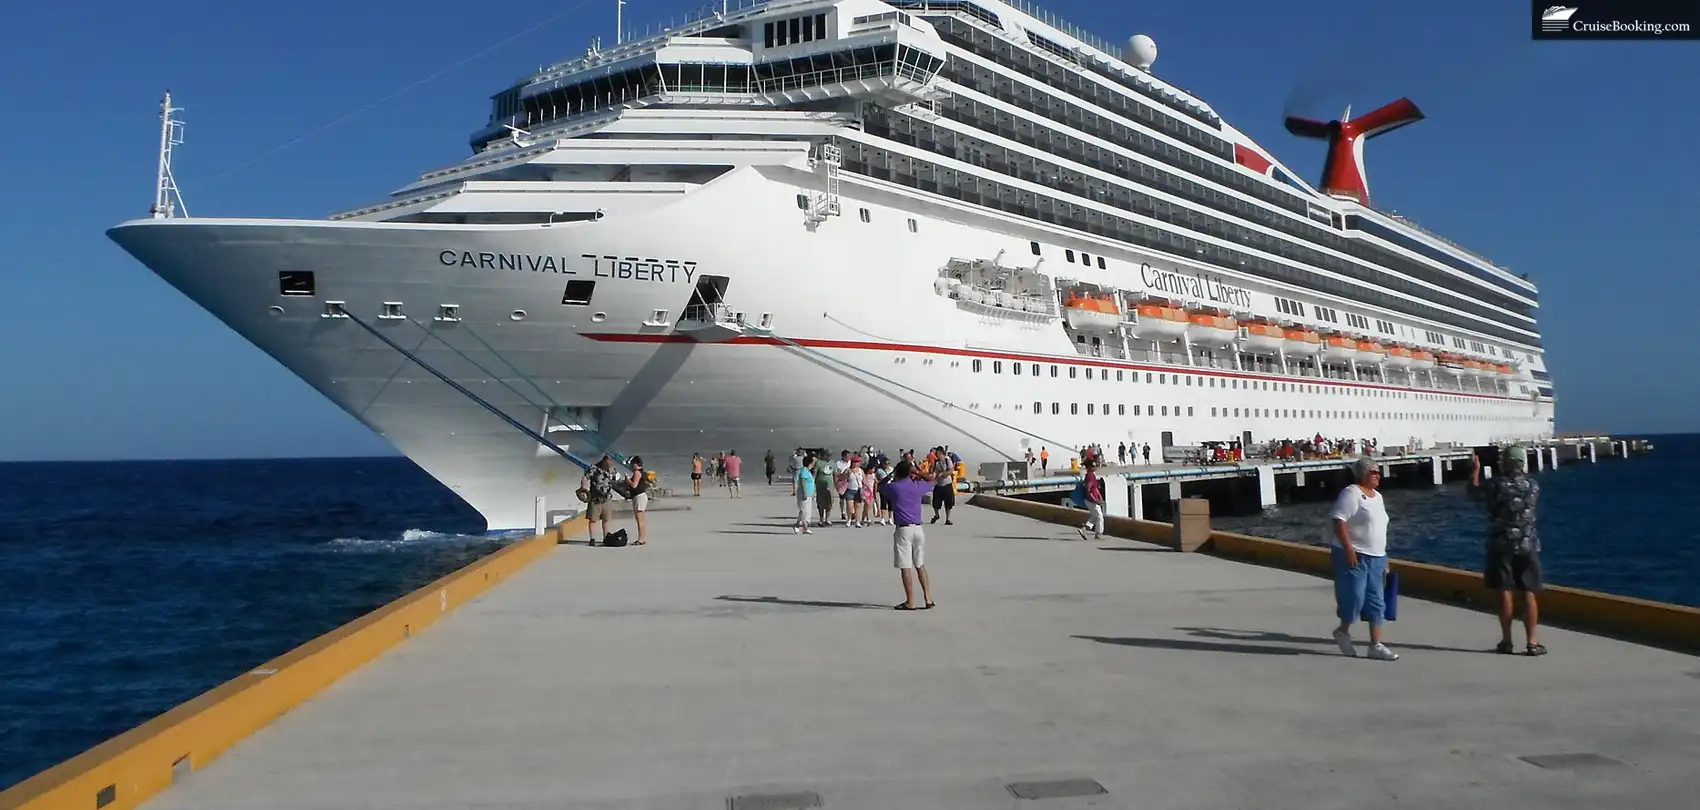 The new penalty policy of carnival cruise line for its passengers